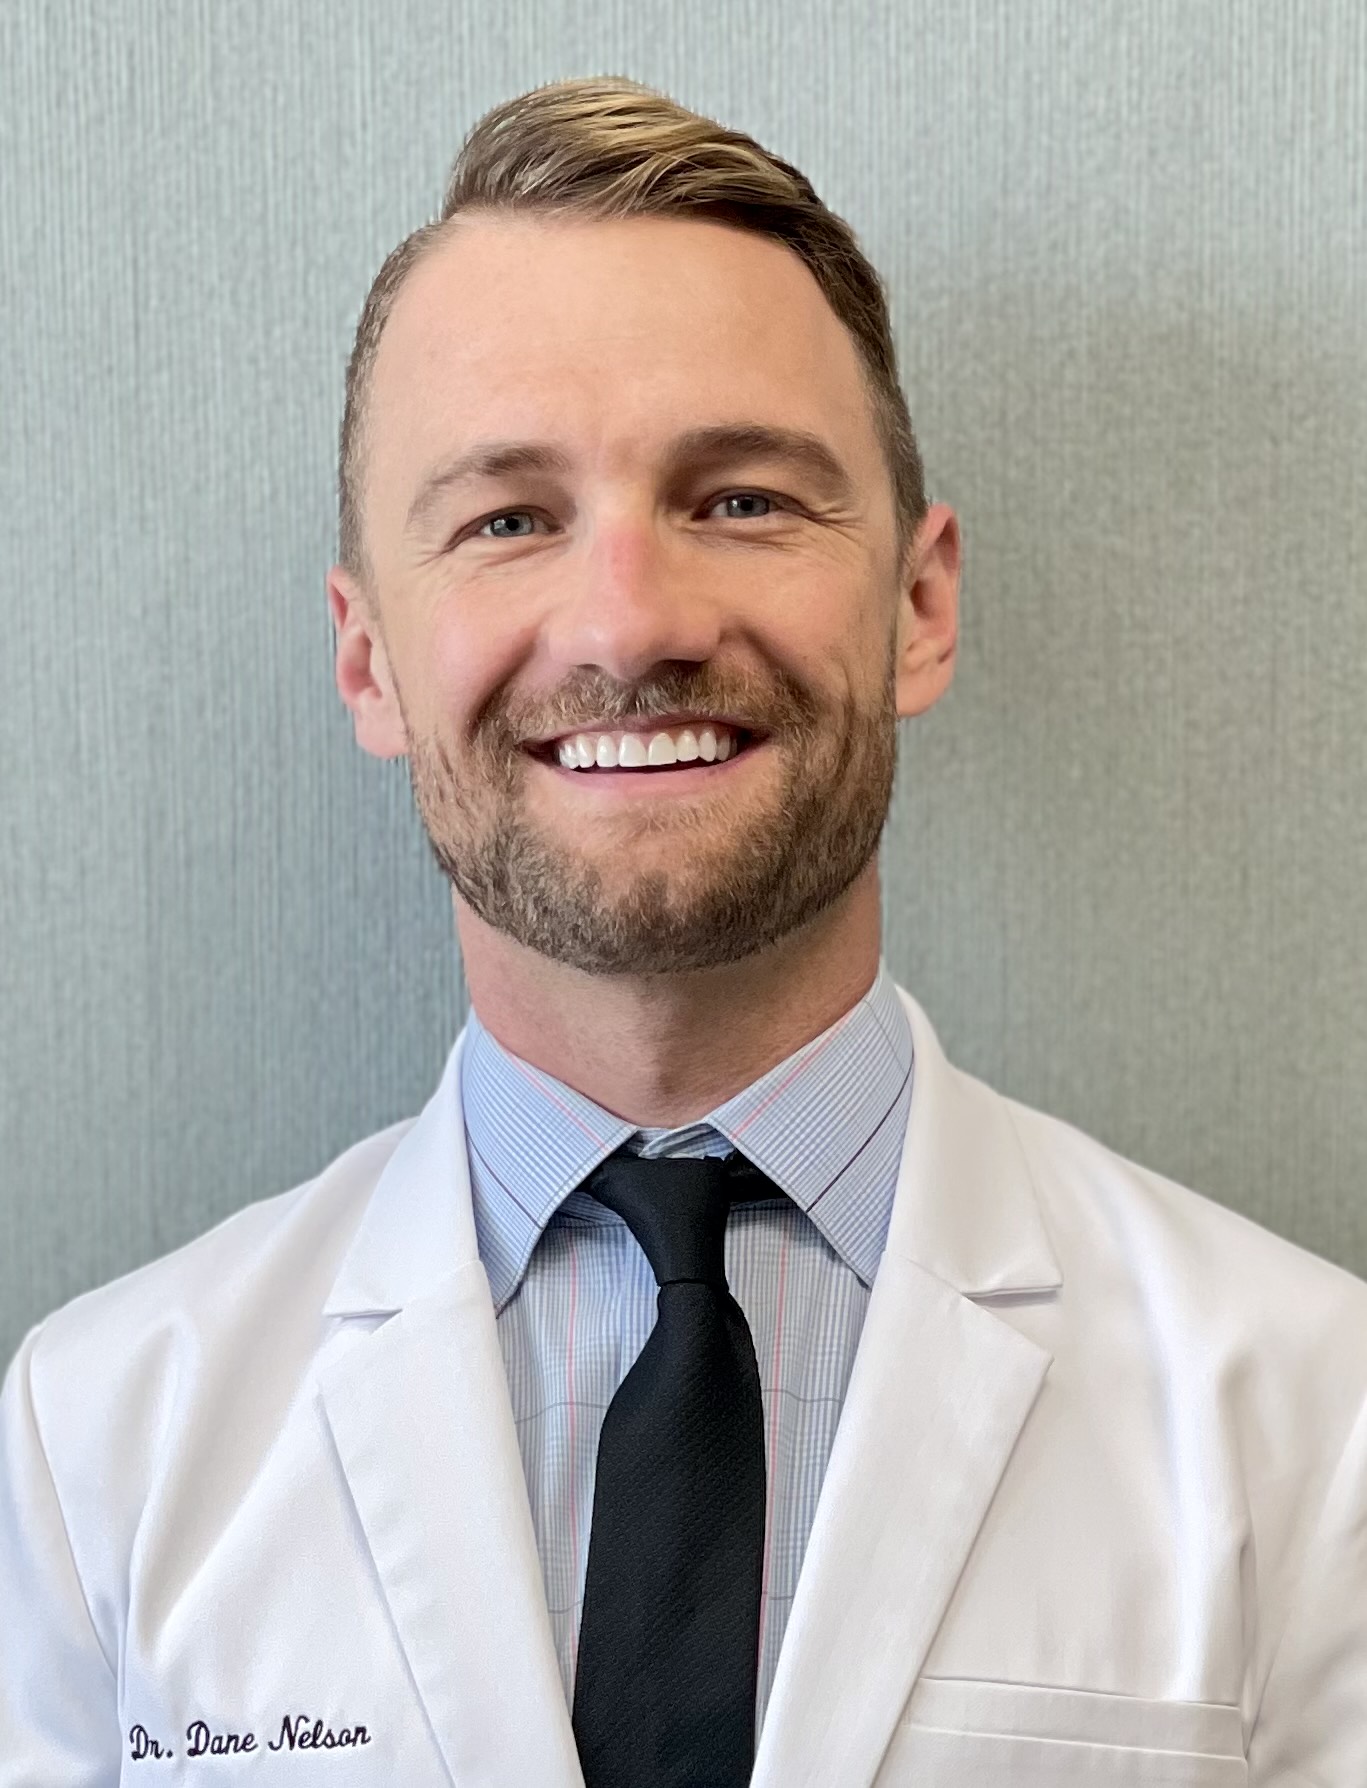 Please welcome Dr. Dane Nelson as the new owner and doctor of Aberdeen Dental!  Dr. Nelson grew up in Stillwater, Minnesota. He attended the University of Wisconsin-Madison where he graduated with honors. He then returned to the University of Minnesota School of Dentistry where he earned his Doctorate in Dental Surgery (DDS) degree in 2016.   After graduation, he started his career serving our country as a lieutenant in the U.S. Navy Dental Corps. During his active duty time, he completed an Advanced Education in General Dentistry residency in the Chicago area, served overseas at a Marine Corps base in Iwakuni, Japan where he was awarded a Navy & Marine Corps achievement medal for his excellence in clinical work, and led a dental clinic in Washington state. Dr. Nelson has over 8 years of clinical experience, and over 4 years in private practice. He has treated tens of thousands of patients of all ages and dental needs in his career and he is now excited to fulfill his dream of owning a dental practice!  Dr. Nelson is particularly passionate about comprehensive patient care, especially restoring or replacing missing teeth for esthetic and healthy smiles. He keeps up on these modern dental treatments through extensive continuing education coursework and has completed over 10 times the required hours needed to keep his license active. He has completed extensive training in esthetic dentistry and surgical implant dentistry including a year-long implant surgery program with the American Academy of Implant Dentistry held in Vancouver, Canada.  In his personal life, Dr. Nelson is an avid traveler and sports & outdoors enthusiast. He has even lived abroad in three different countries - Spain, Denmark & Japan! He enjoys running, biking, hiking, camping, fishing, snowboarding, nordic skiing, and spending time with his family & friends. Dr. Nelson is excited to meet you and to take great care of the patients of Aberdeen Dental!